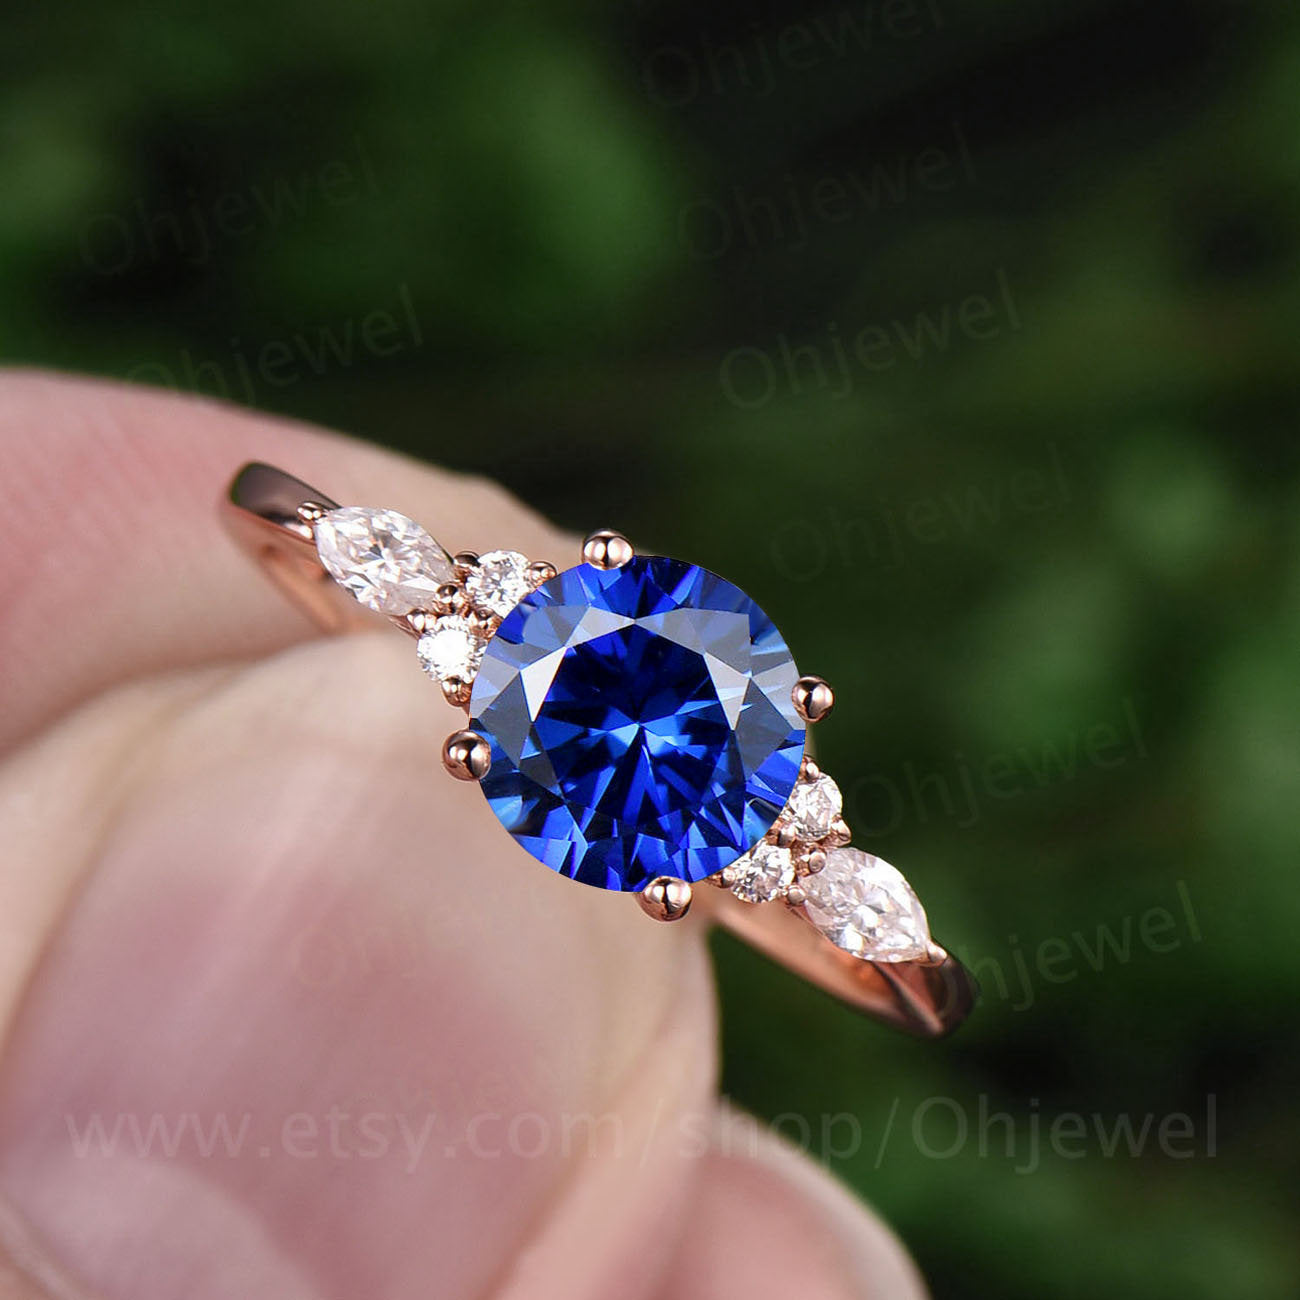 7mm round sapphire ring for women unique vintage sapphire engagement ring rose gold sapphire jewelry art deco moissanite ring wedding gift